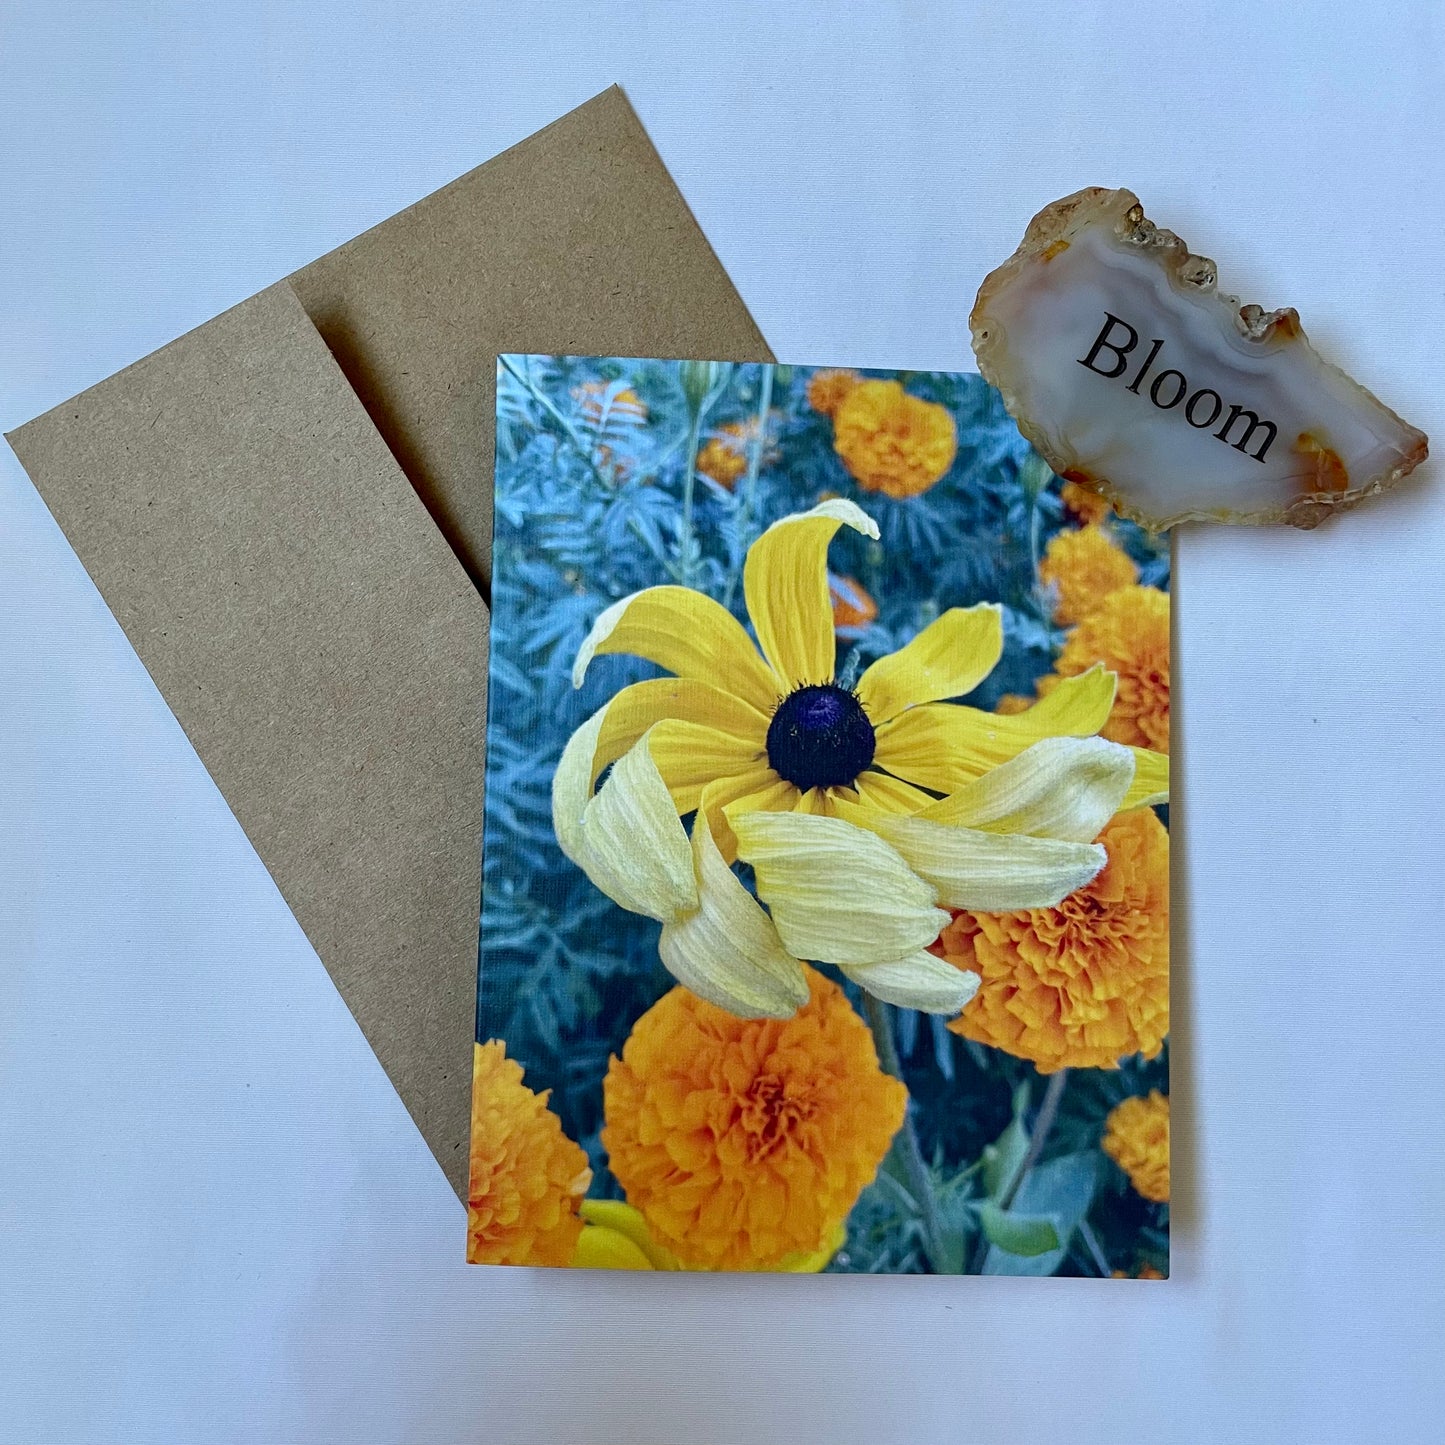 Fall Delight Original Nature Photography Greeting Card Boxed Set of 5 with Kraft Envelopes